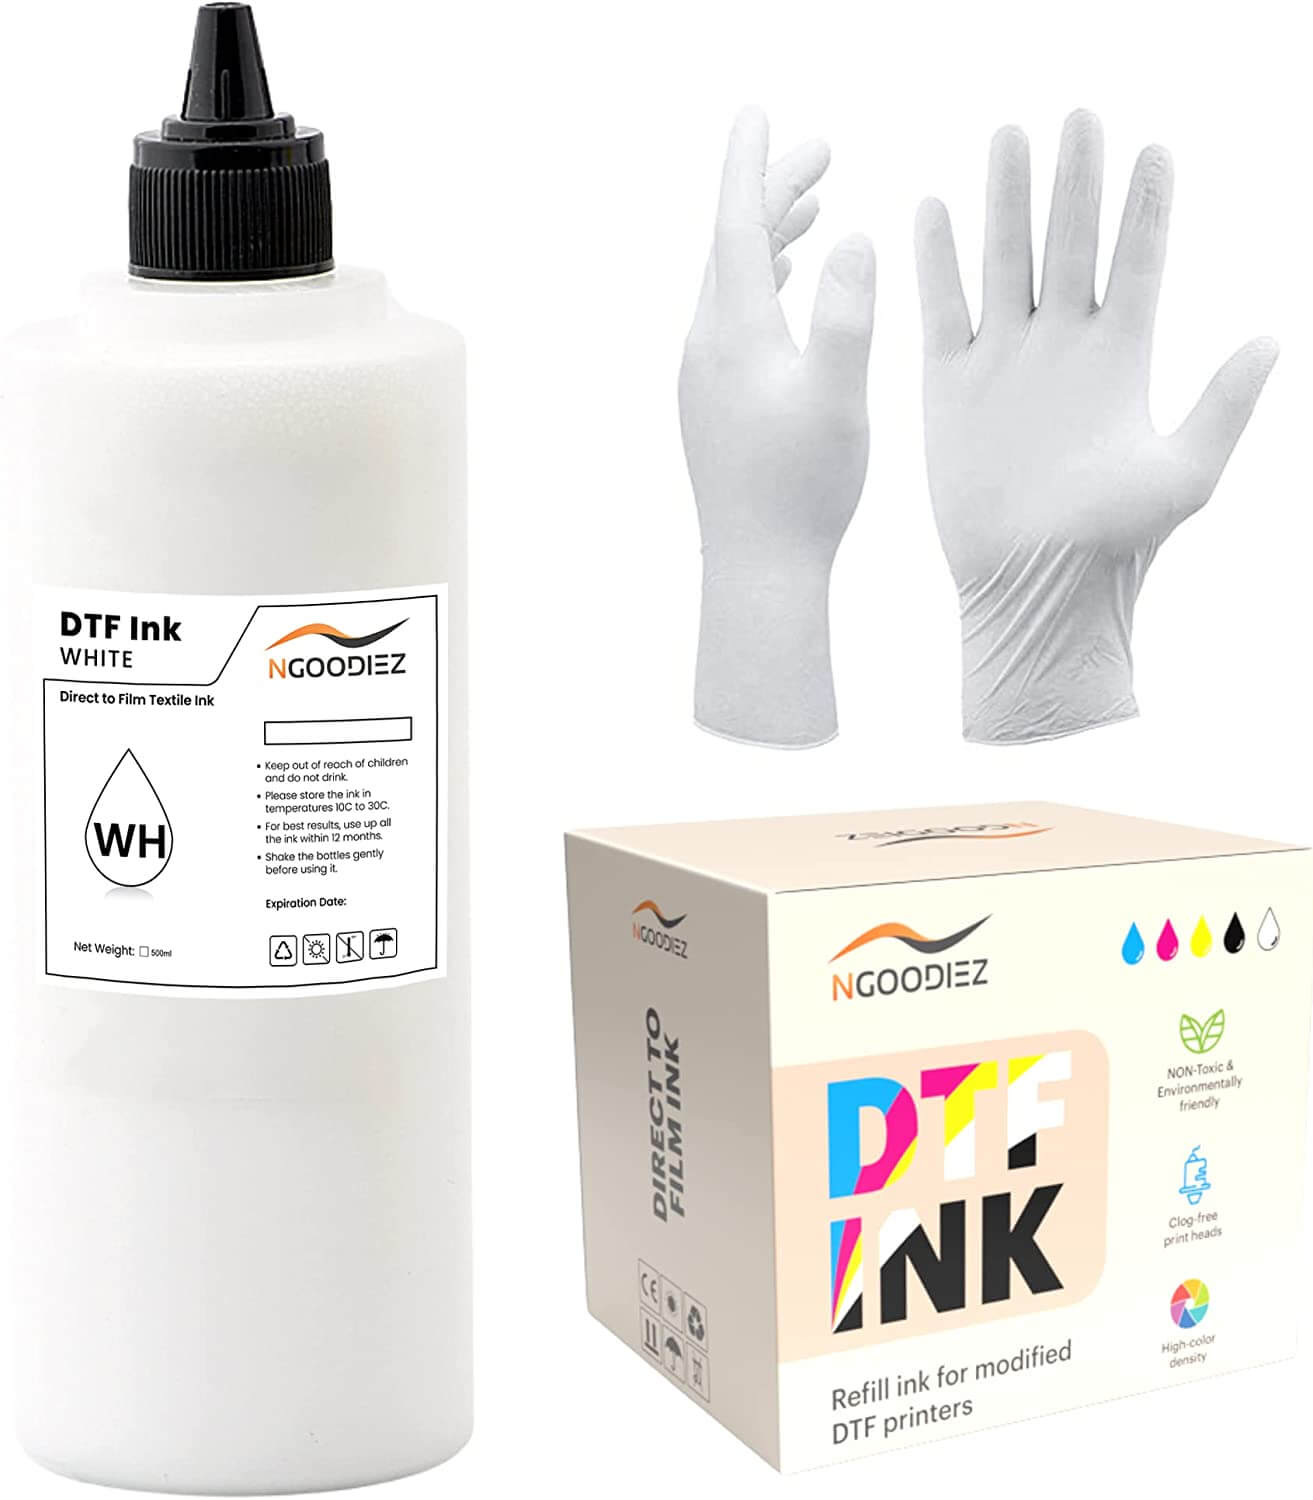  INKCLOUD Premium DTF Ink 250ML Combo Pack, 6-Pack, 2W, 1B, 1C,  1M, 1Y, Pigment Ink for PET Film Heat Transfer Printing Work with DTF  Transfer Printers Epson DX5 DX7 5113 XP600